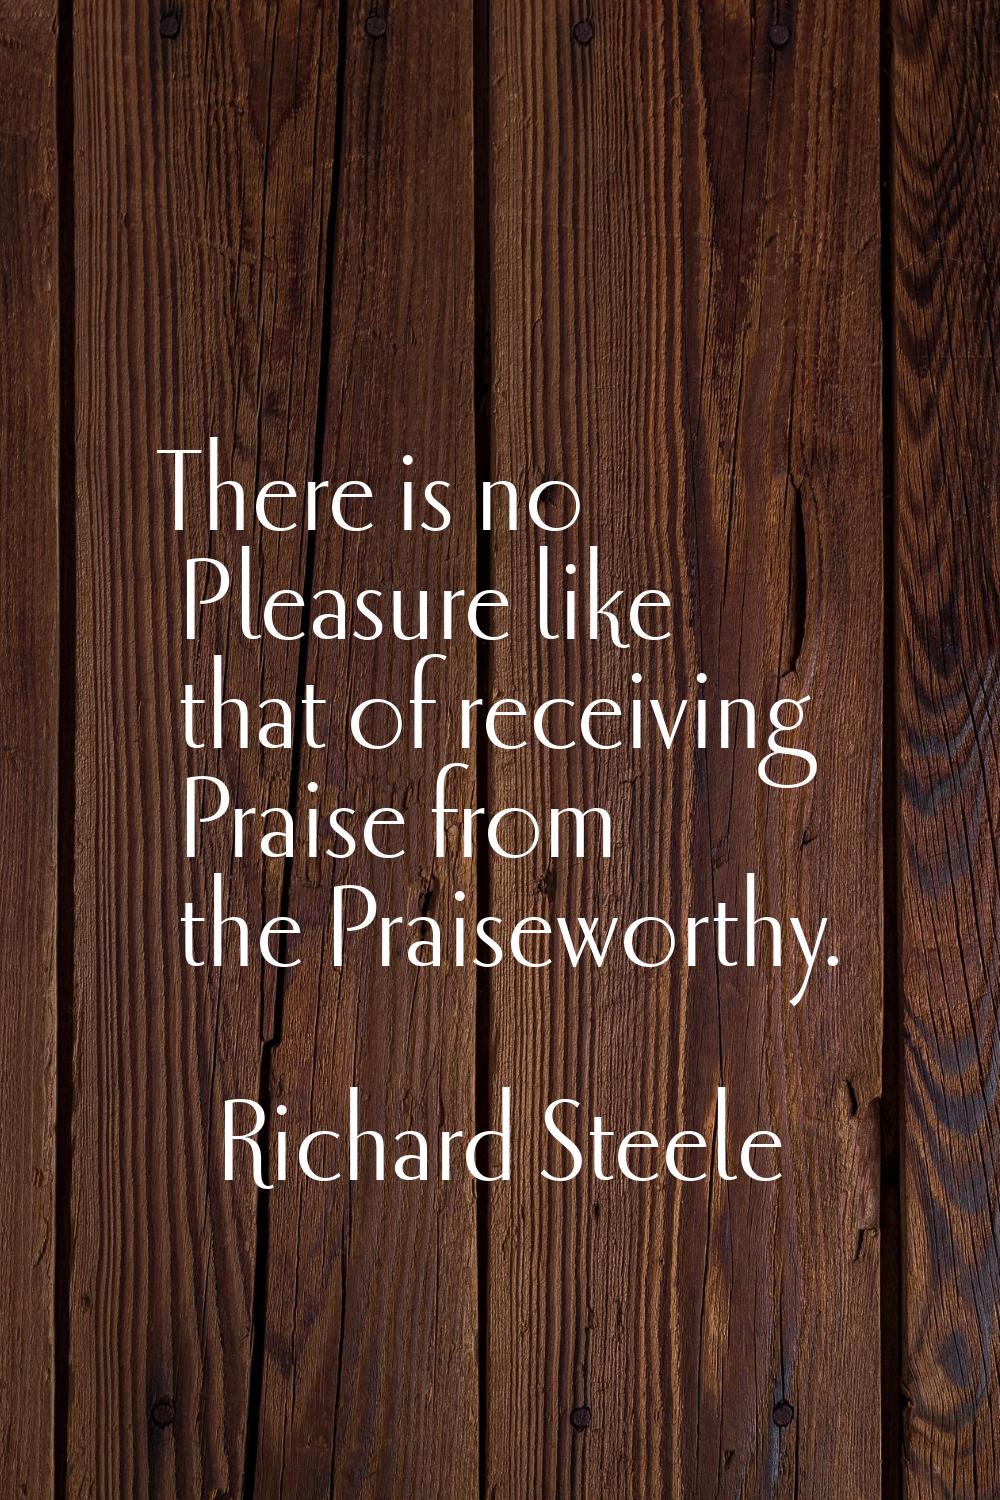 There is no Pleasure like that of receiving Praise from the Praiseworthy.